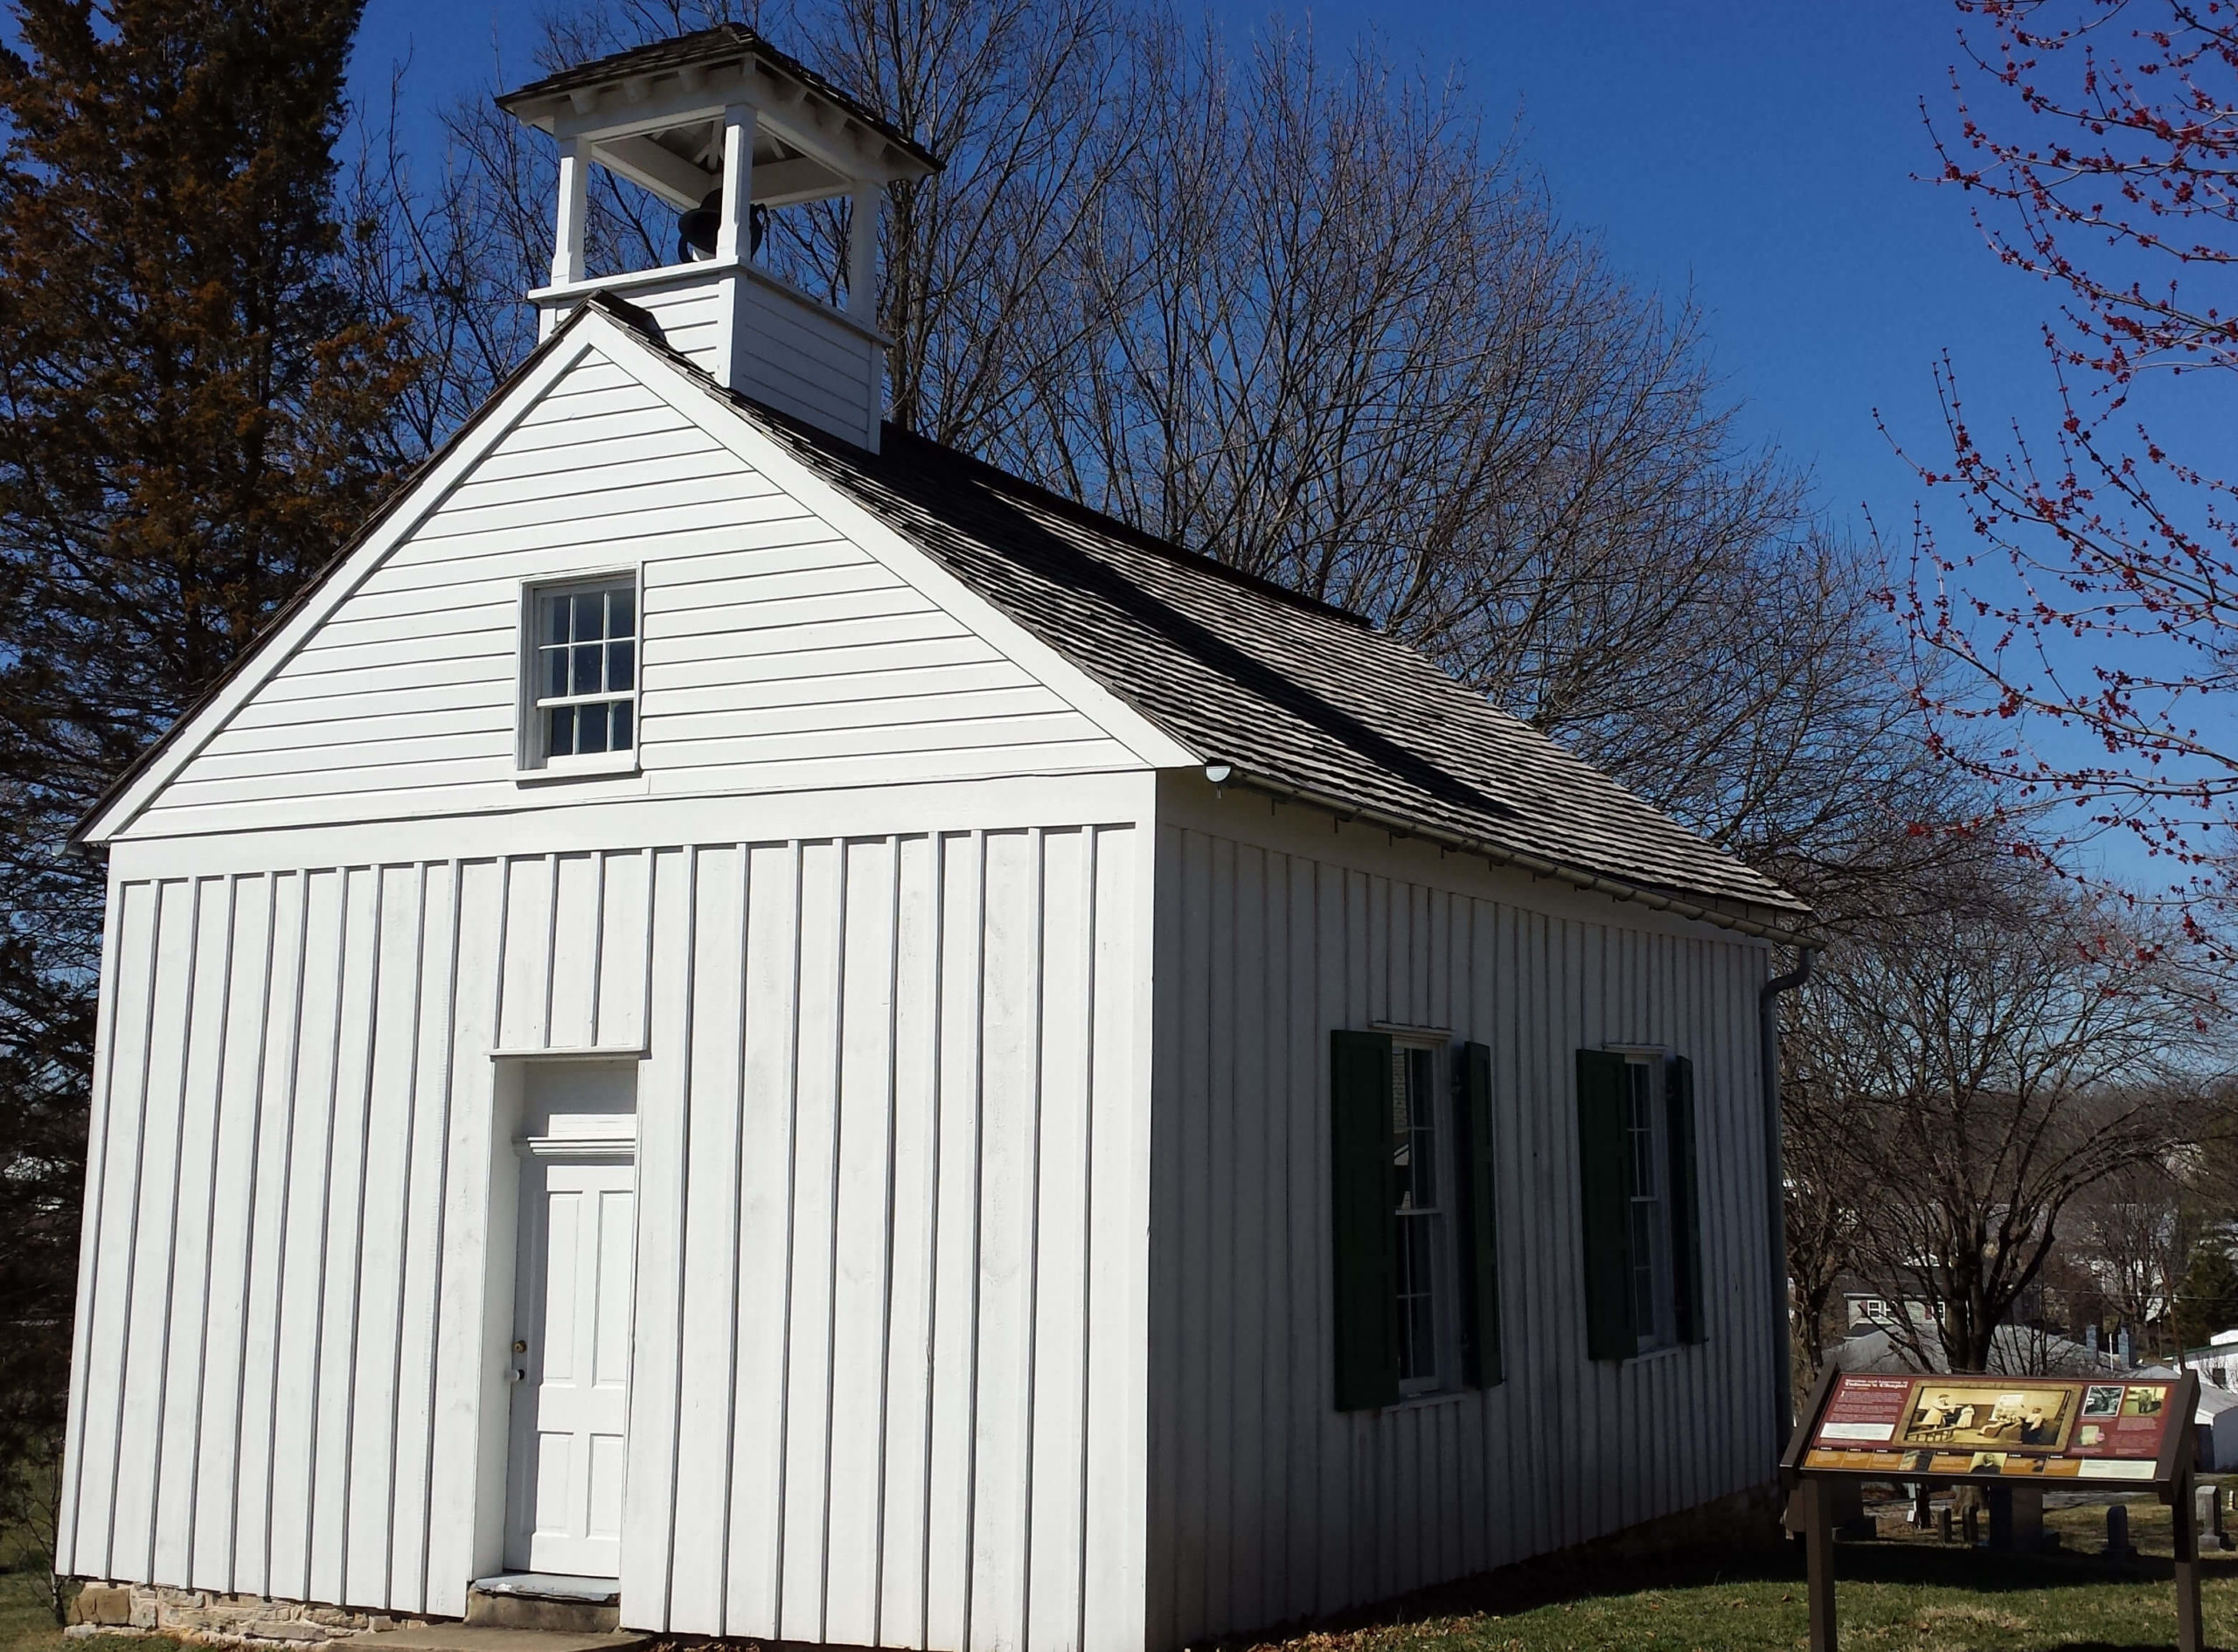 Tolson's Chapel and School